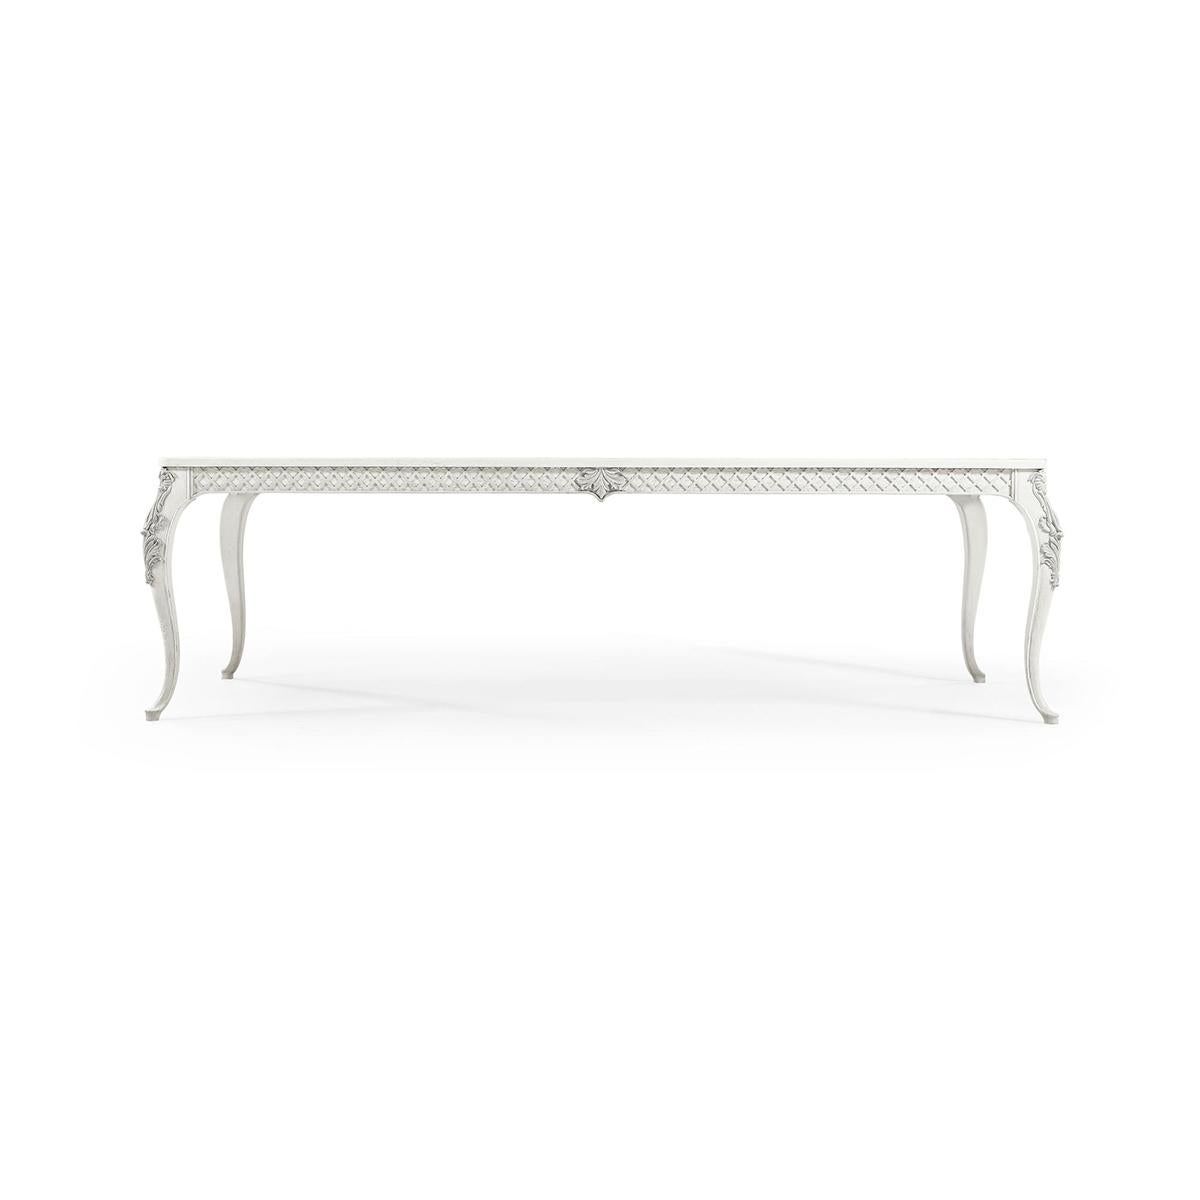 The table is finished in a dry Chalk White with light distressing that adds character and a vintage feel. The legs, sculpted in graceful cabriole style, are adorned with hand-carved floral details and painted in light grey, enhancing their